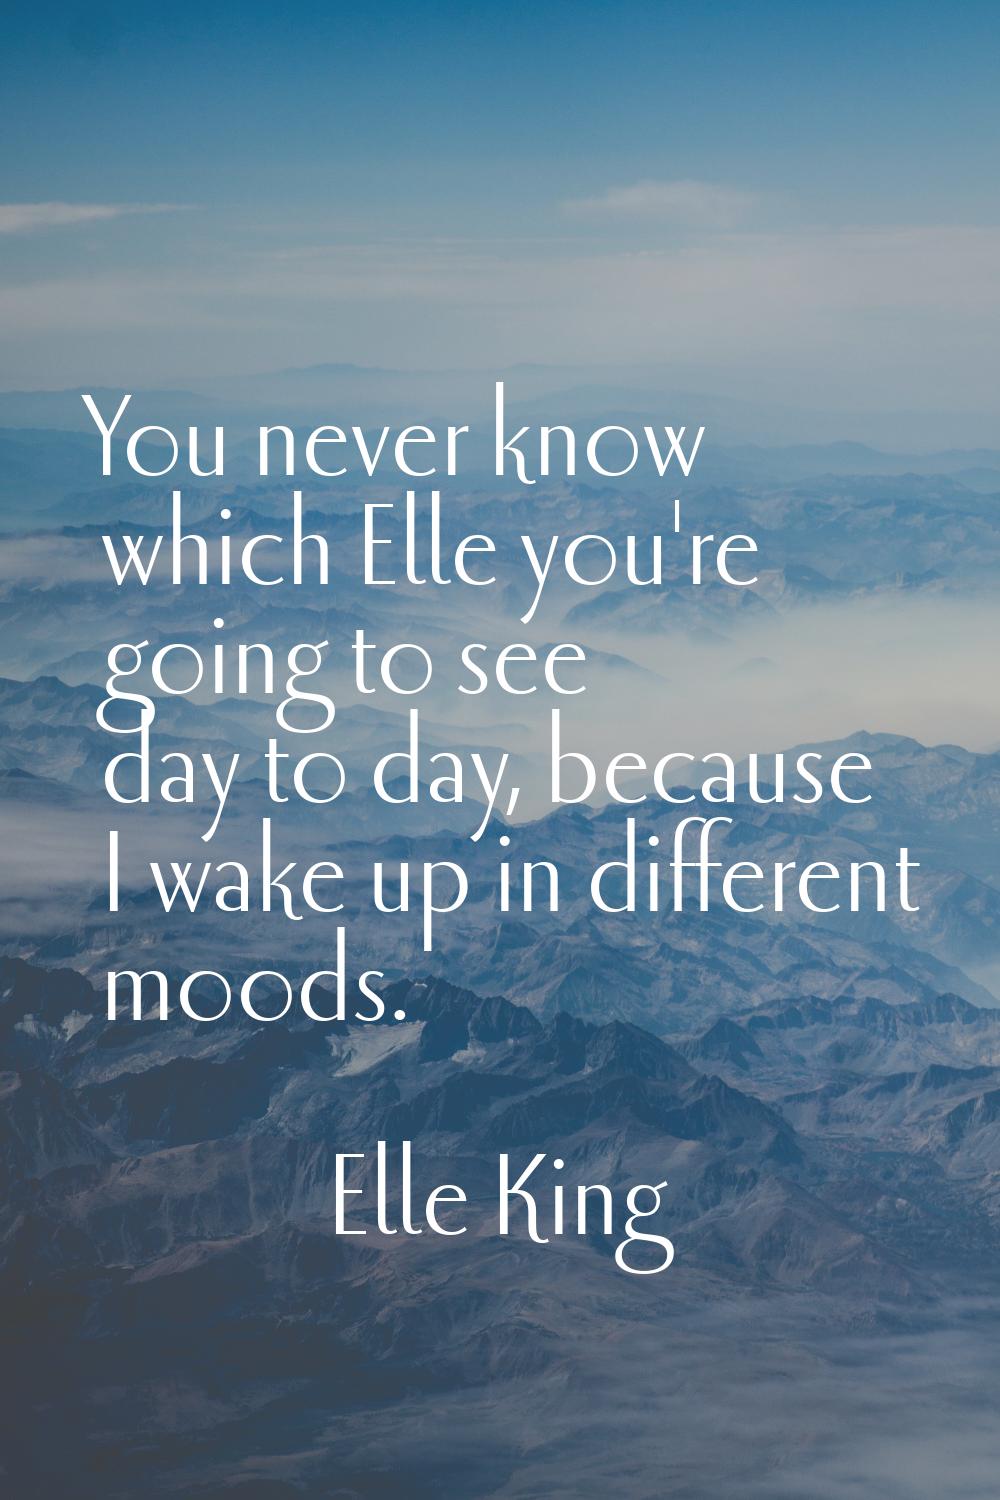 You never know which Elle you're going to see day to day, because I wake up in different moods.